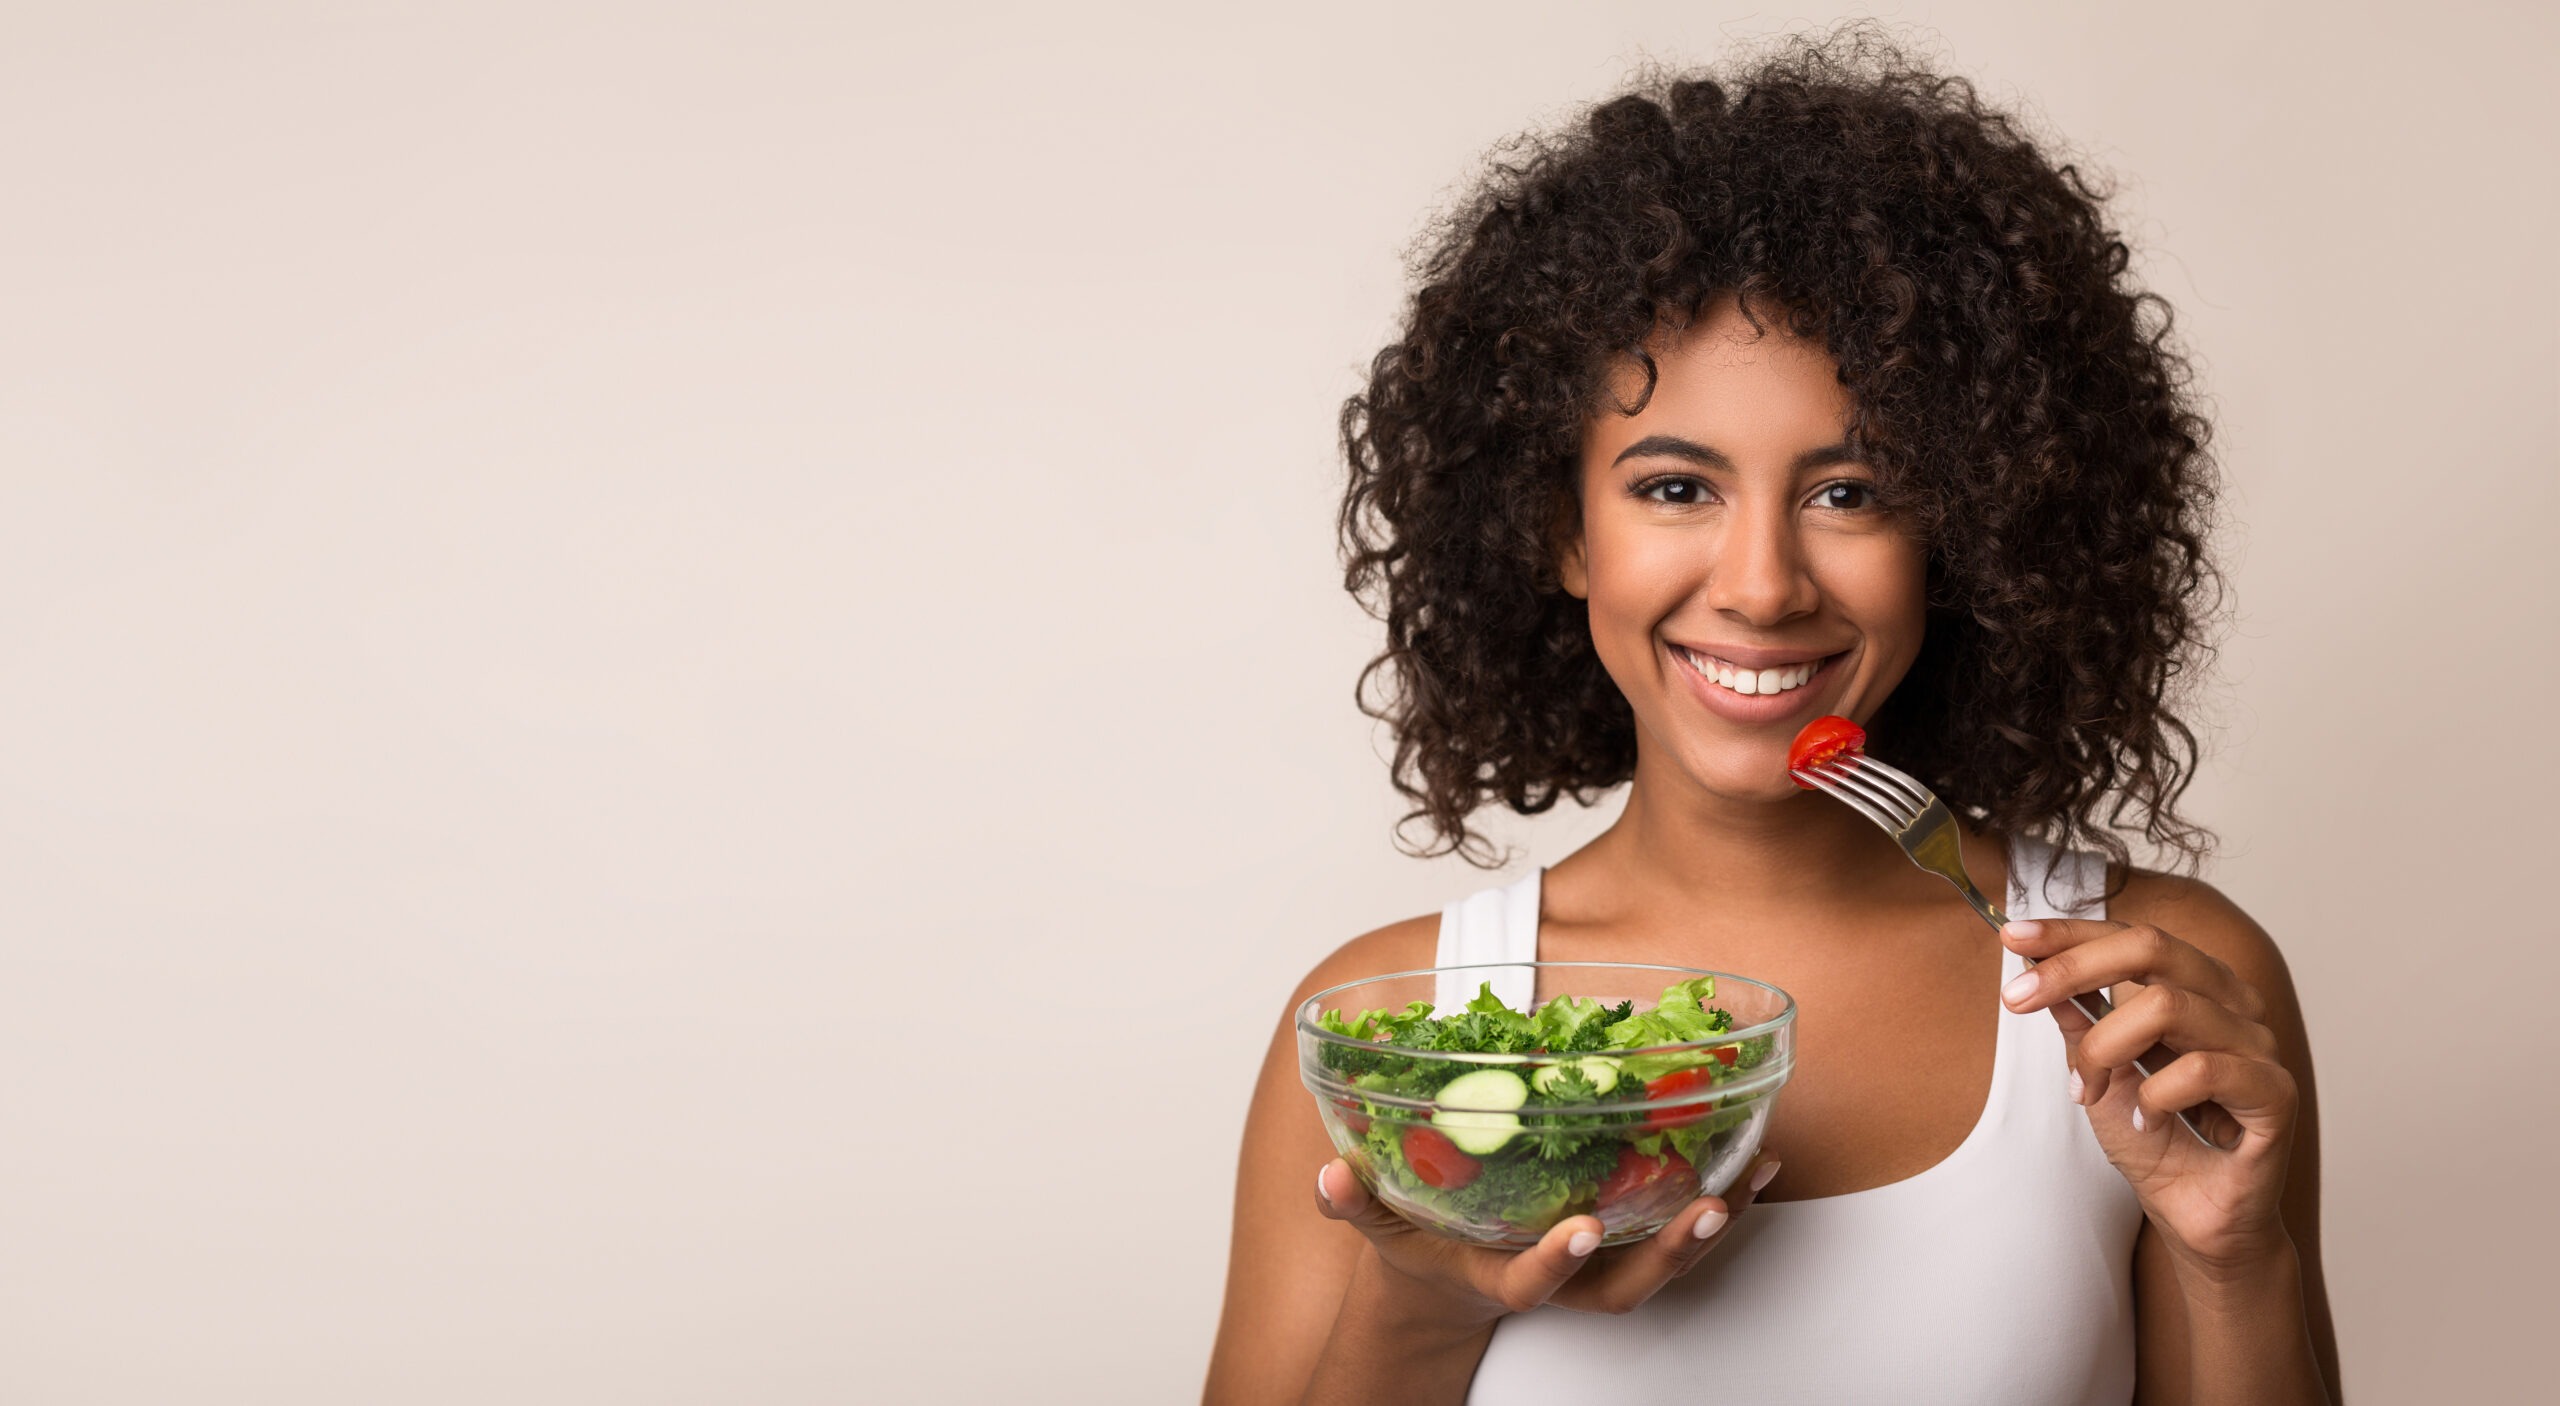 African-american woman eating vegetable salad over light background with copy space